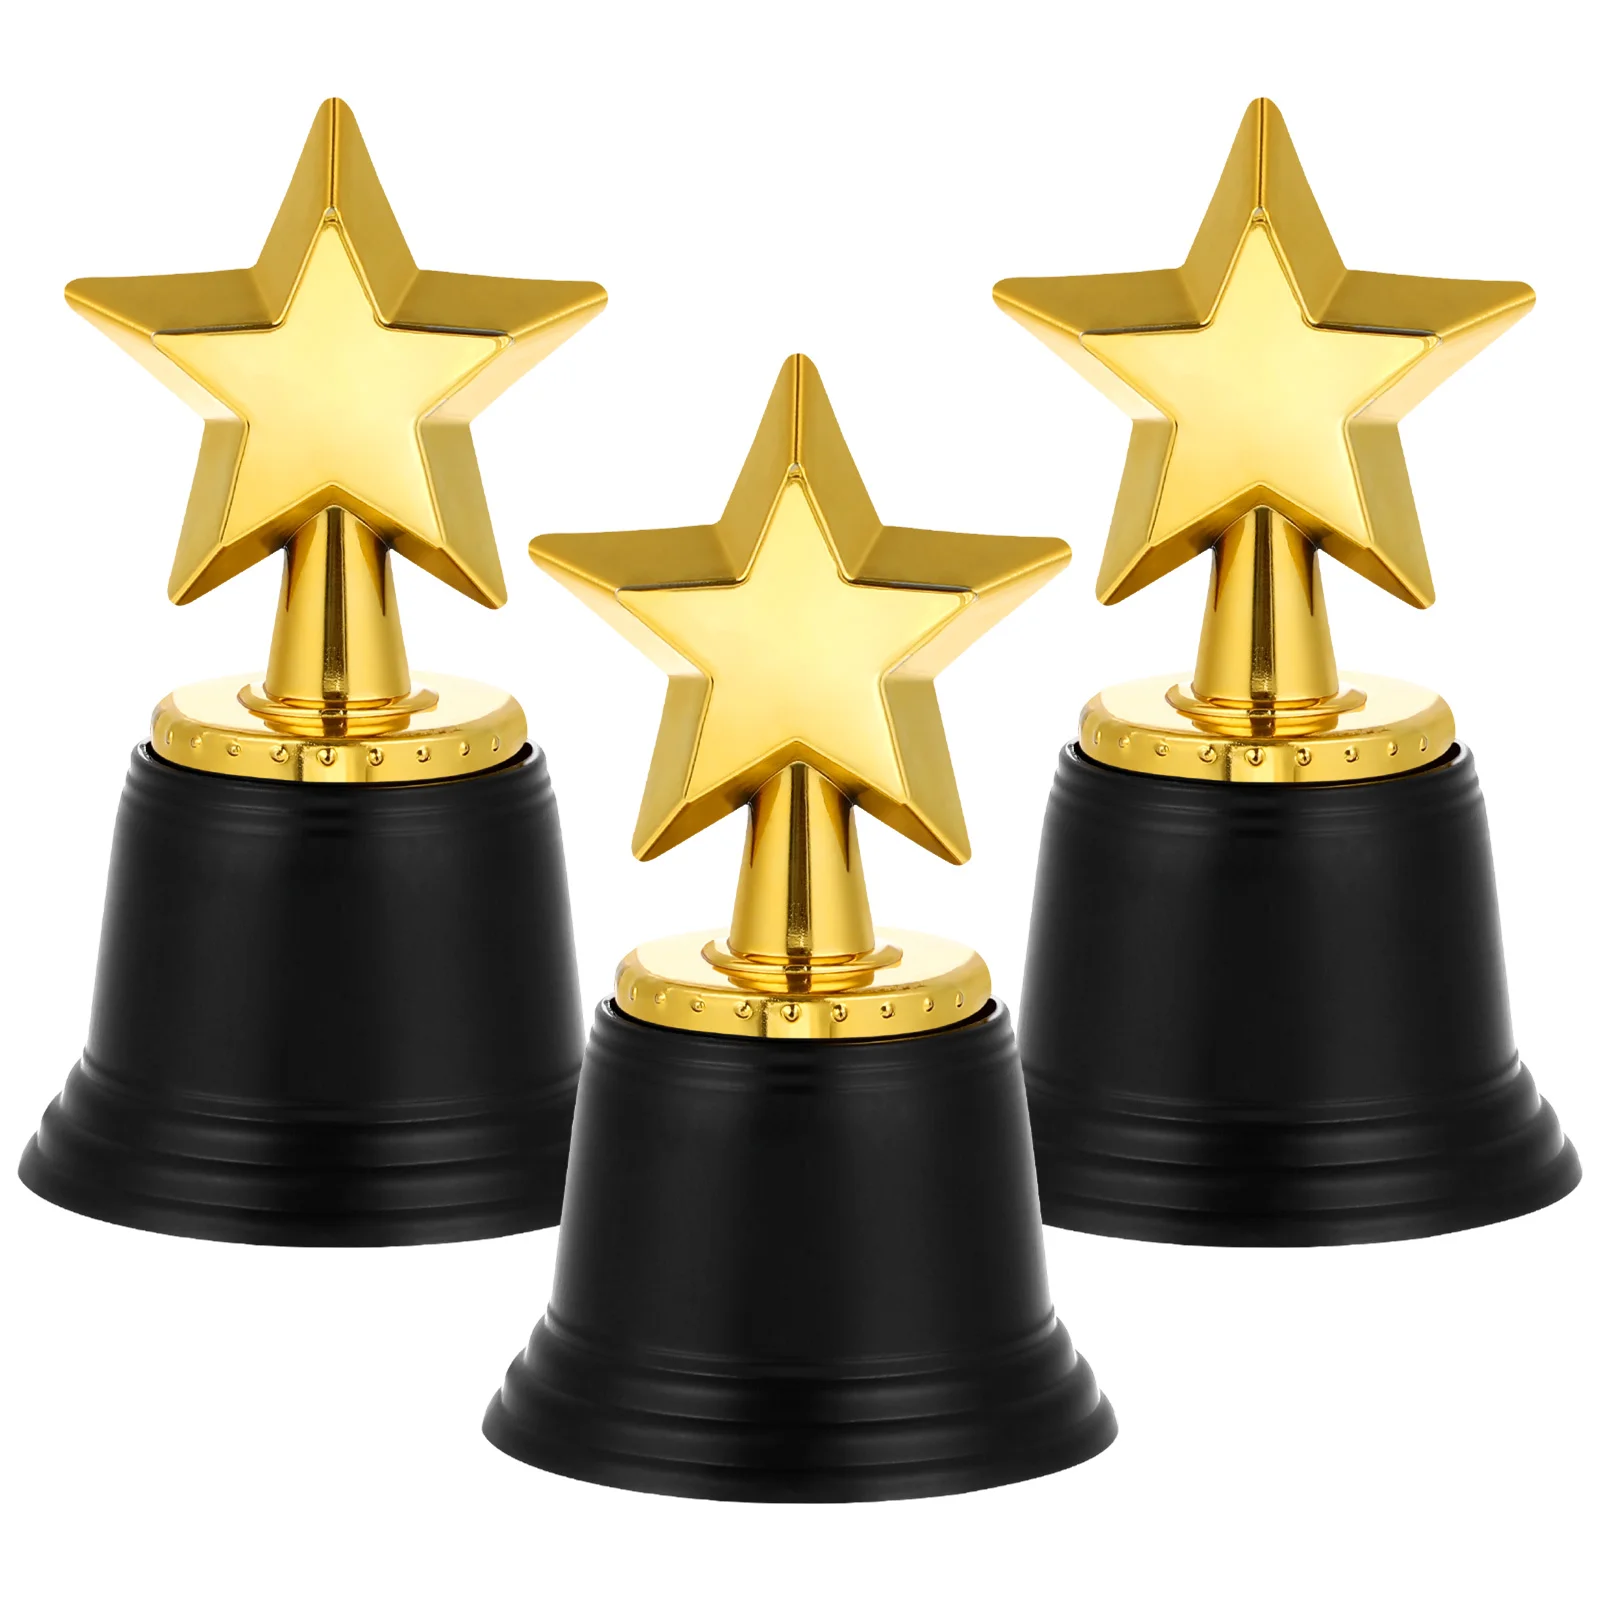 

Trophy Trophies Award Awards Star Kids Cup Mini Gold Winner Party Favors Adults Competition Toy Prizes Adult Gift Personal Large